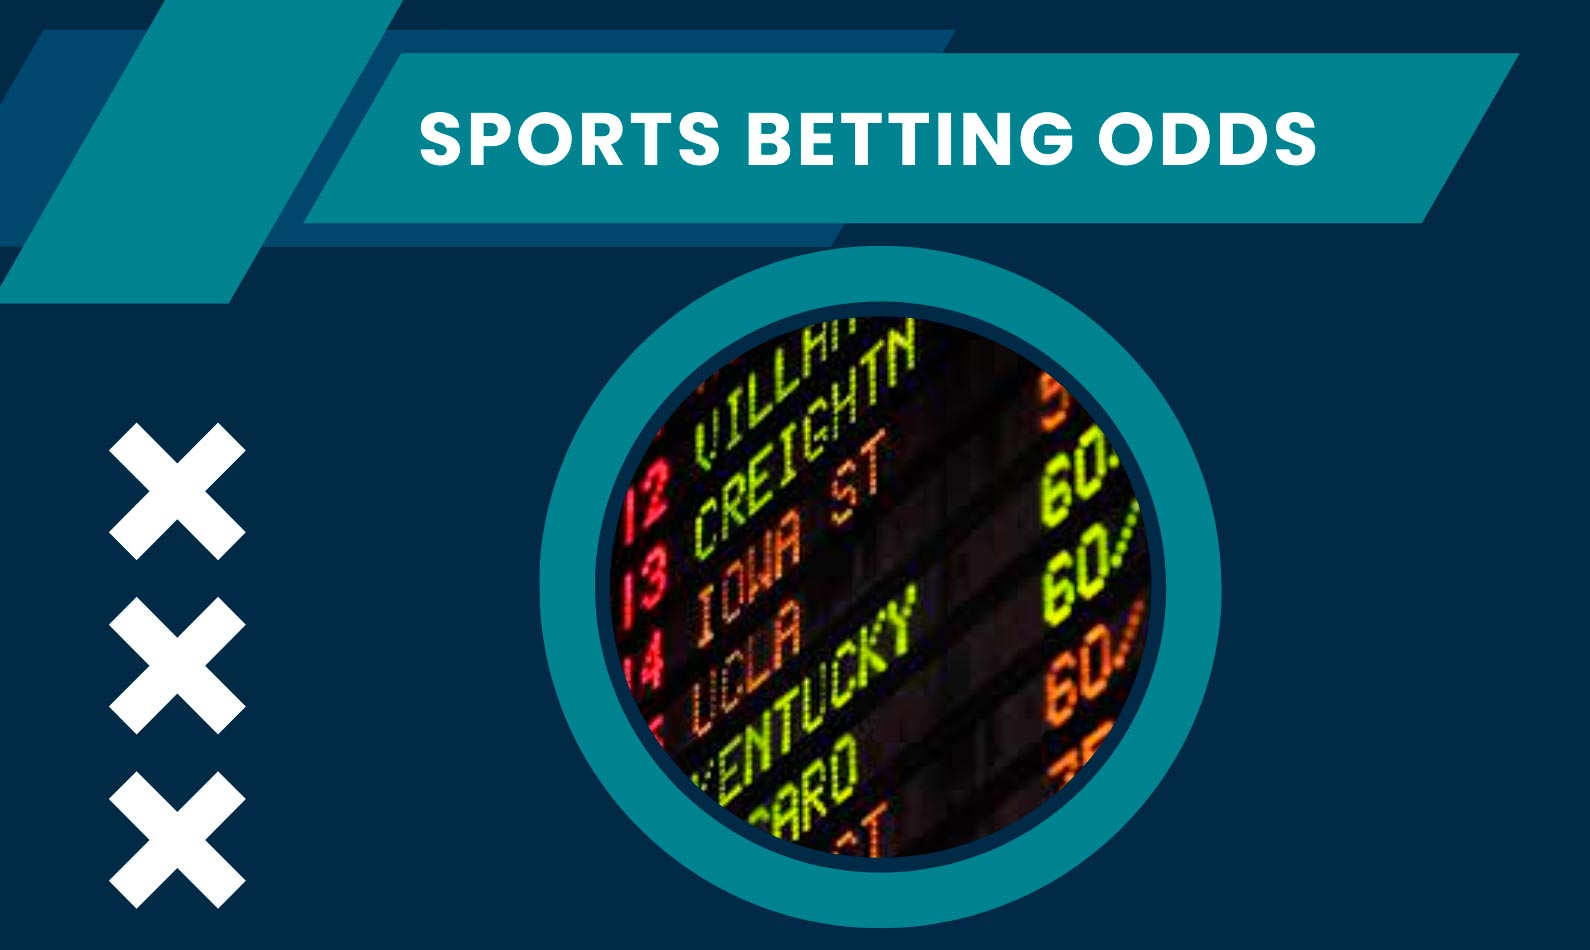 Betting odds are numerical representations of a specific outcome in a sporting event